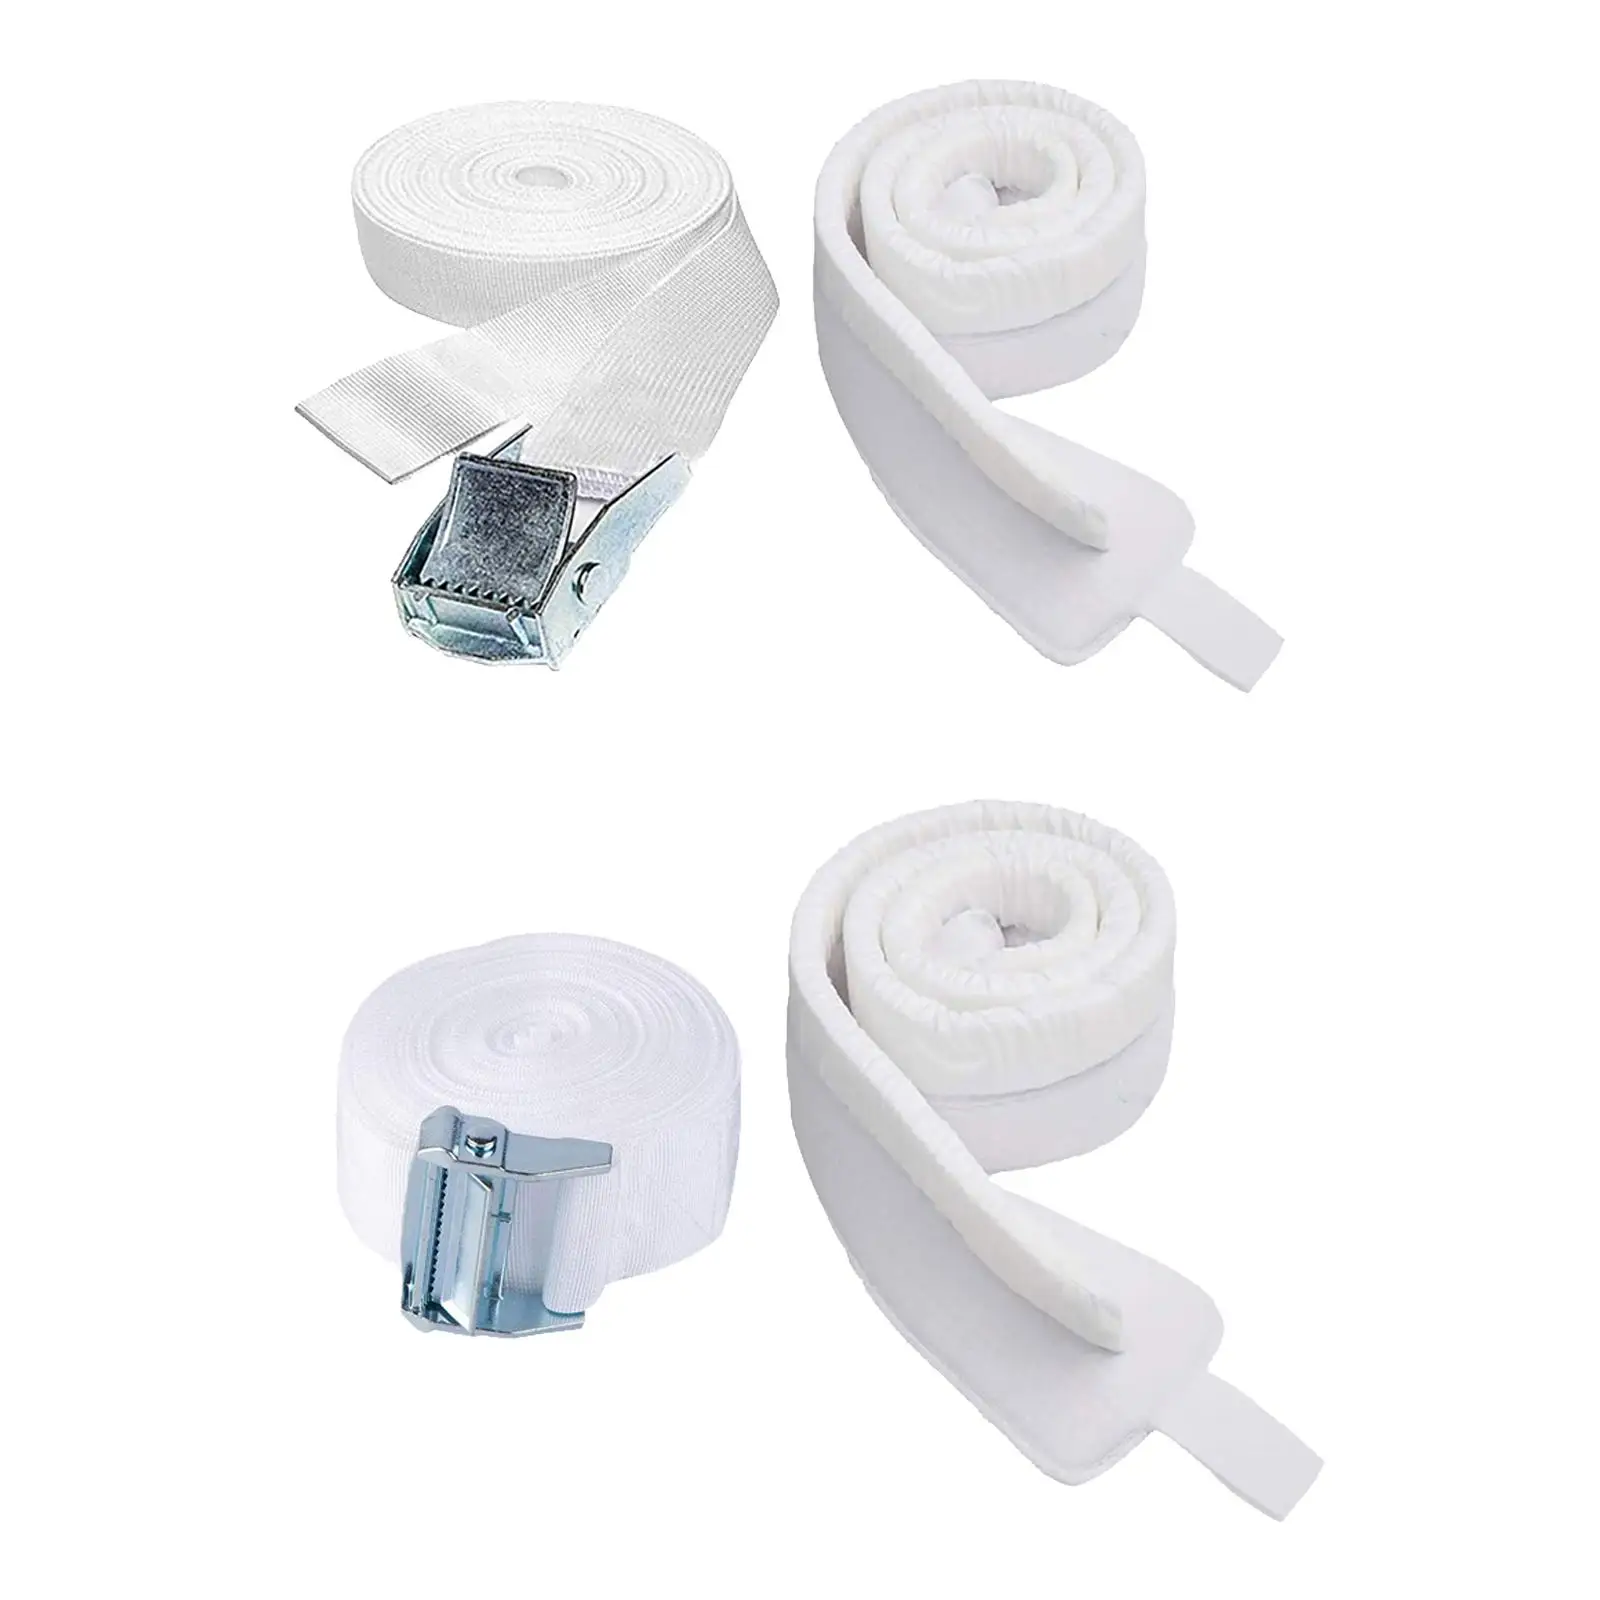 Mattress Connector Adjustable Twin to King Converter Kit   Room Home